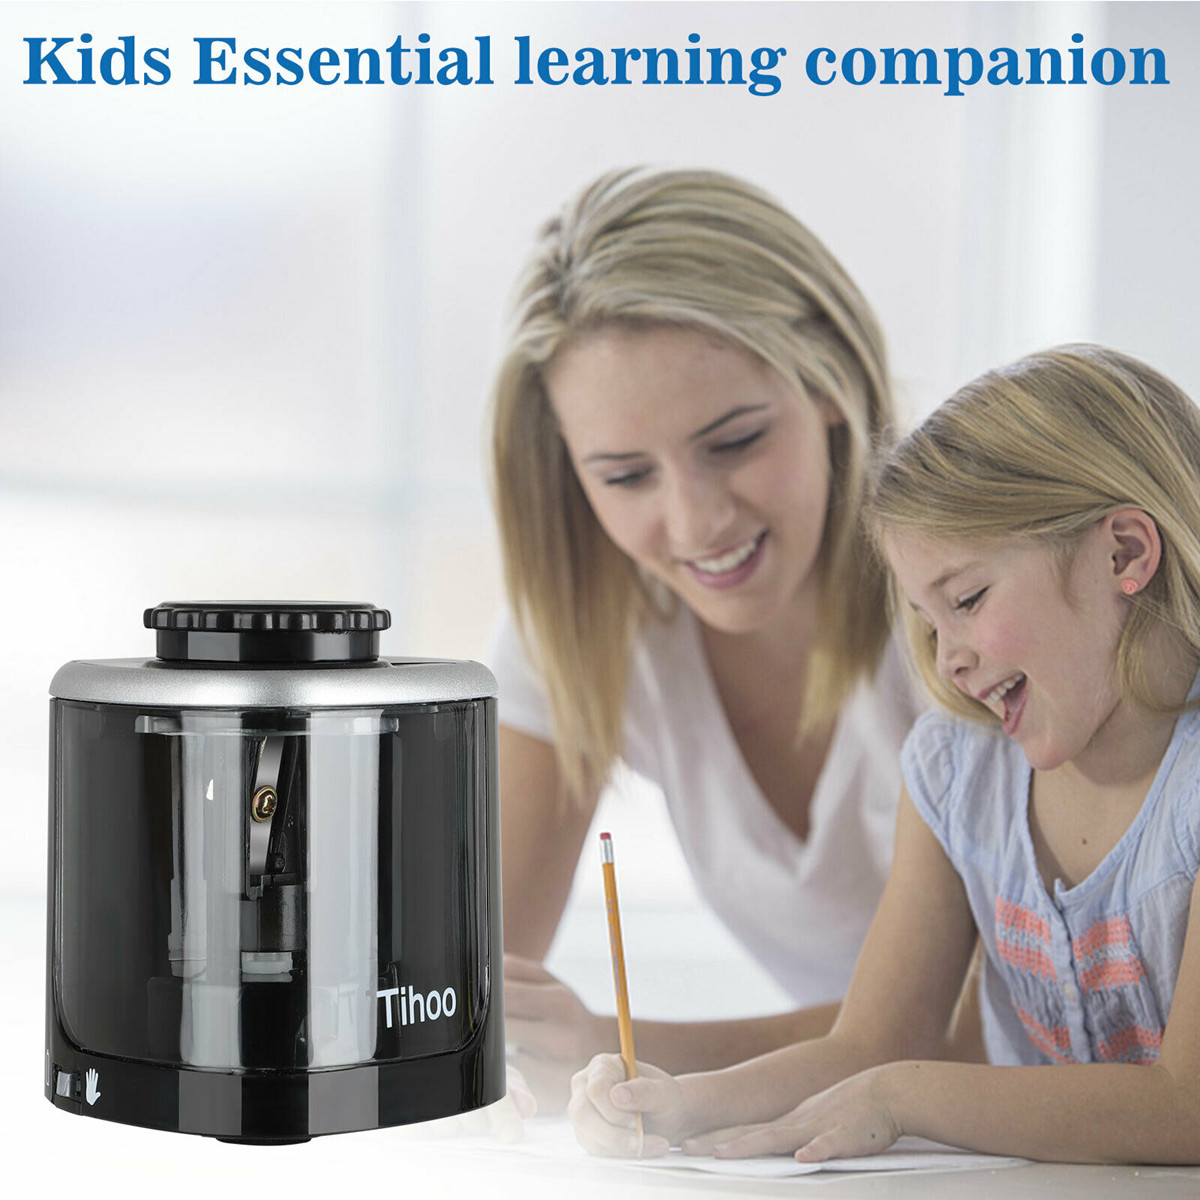 Portable-Electric-Pencil-Sharpener-Automatic-Touch-Switch-School-Office-Classroom-1613697-2